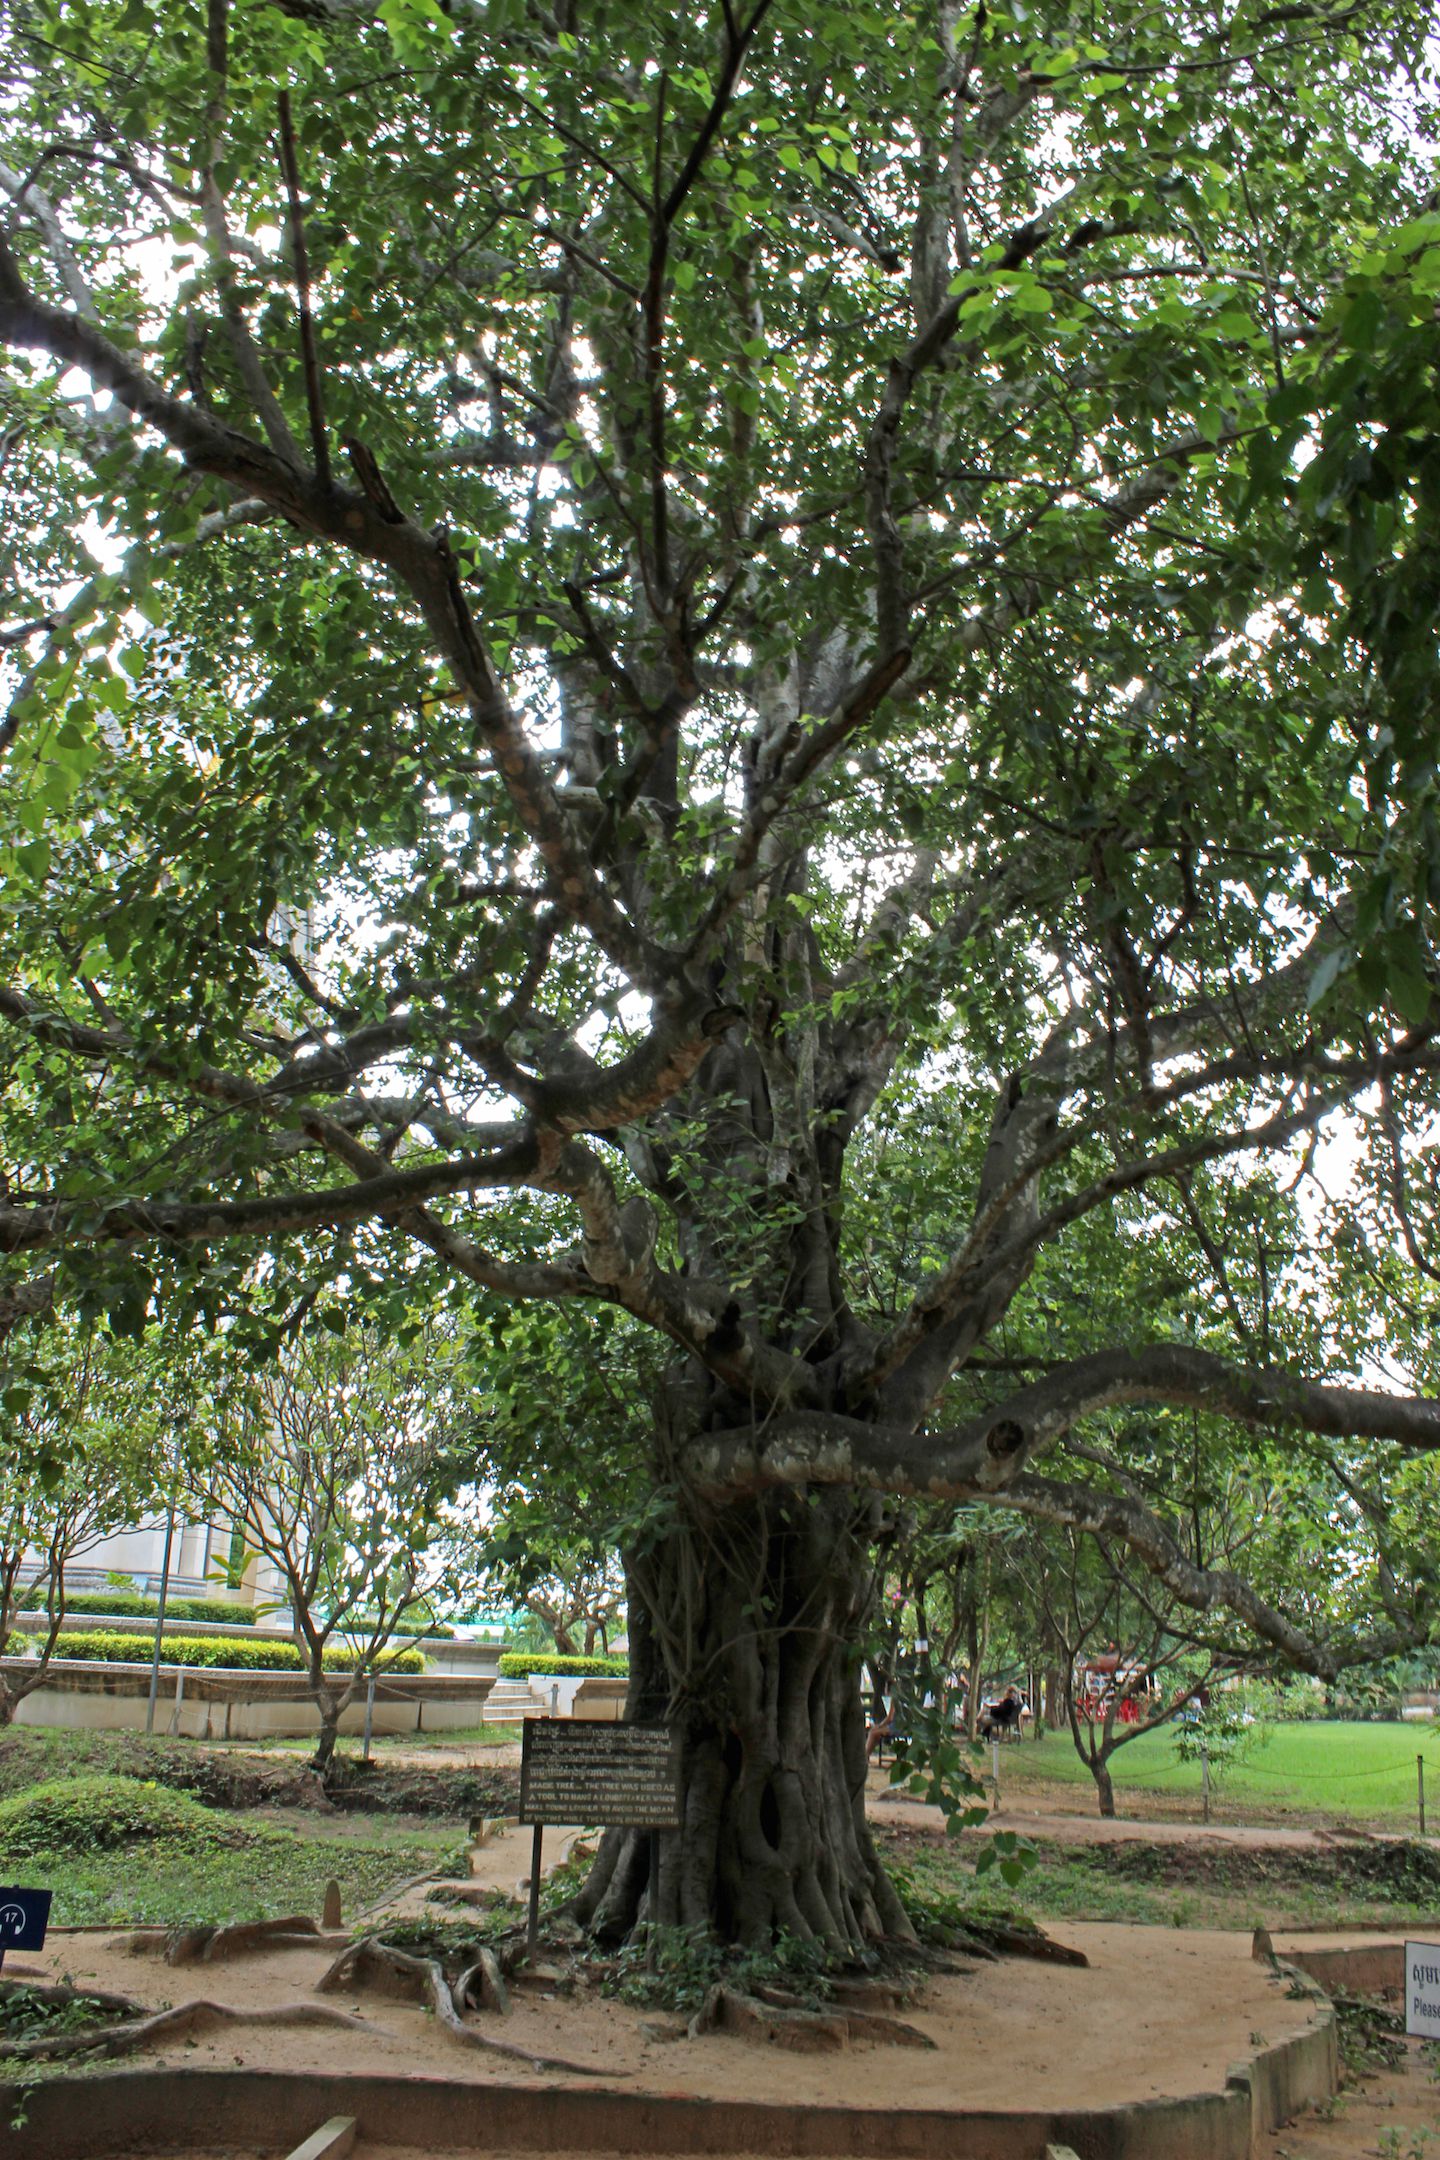 Tree where the speakers playing muffling sounds were hung at the Choeung-Ek Killing Fields